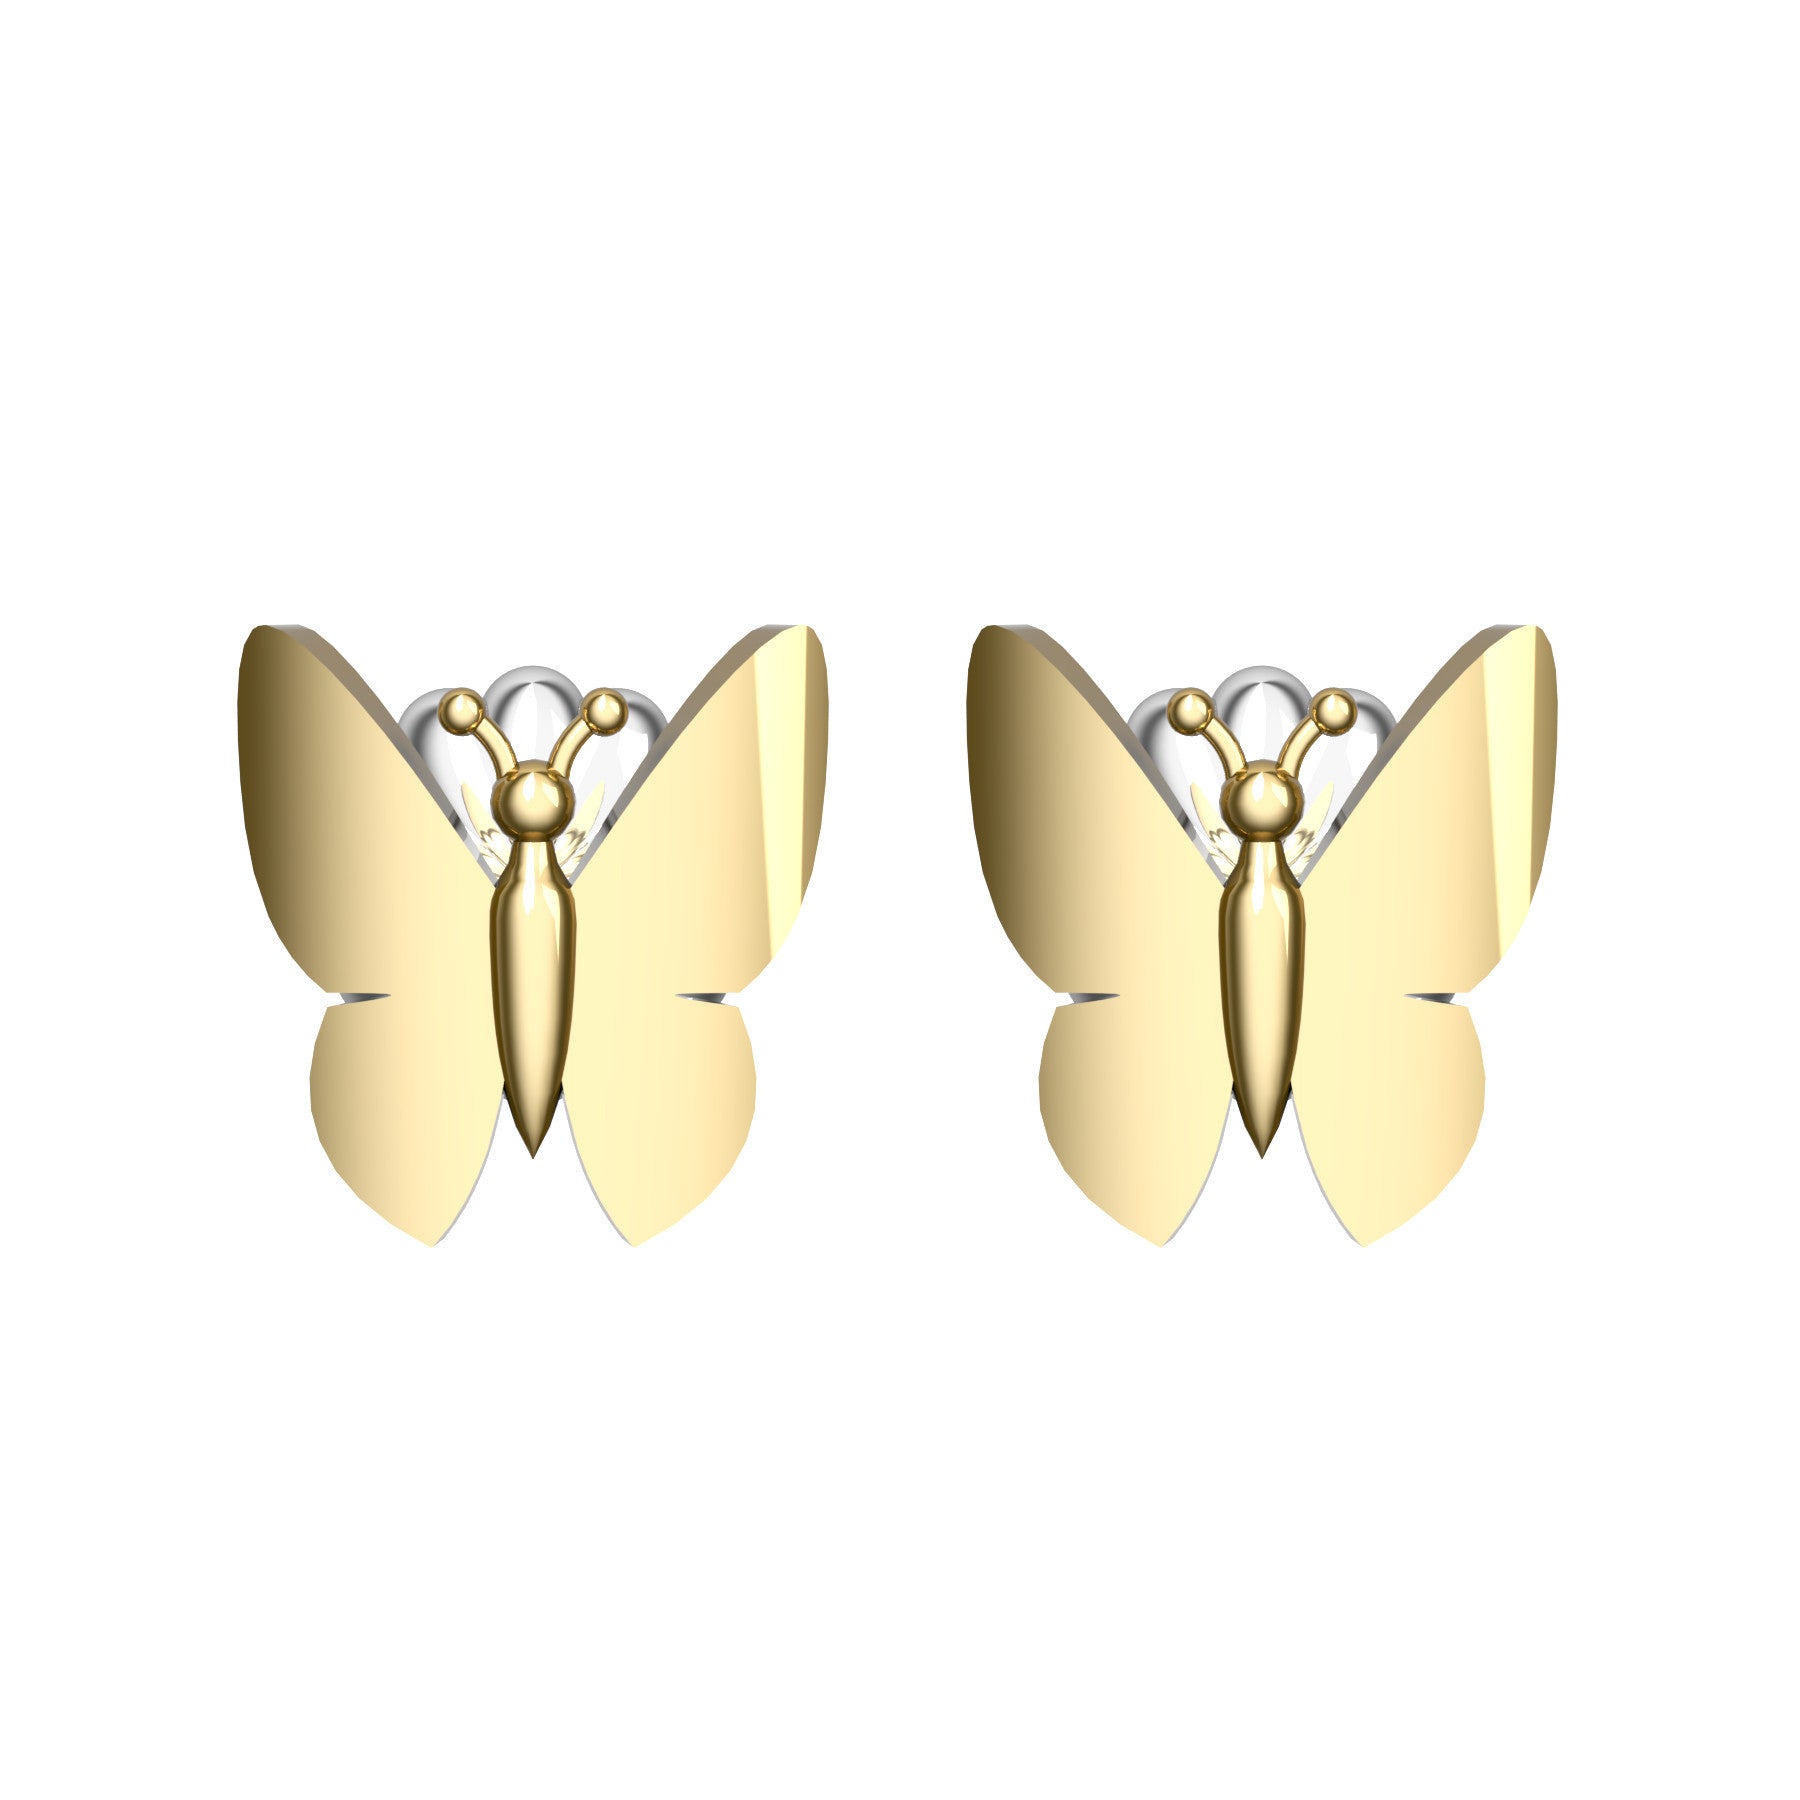 butterfly earrings, 18 K yellow gold, weight about 2,4 g (0.08 oz), size 10x9 mm 